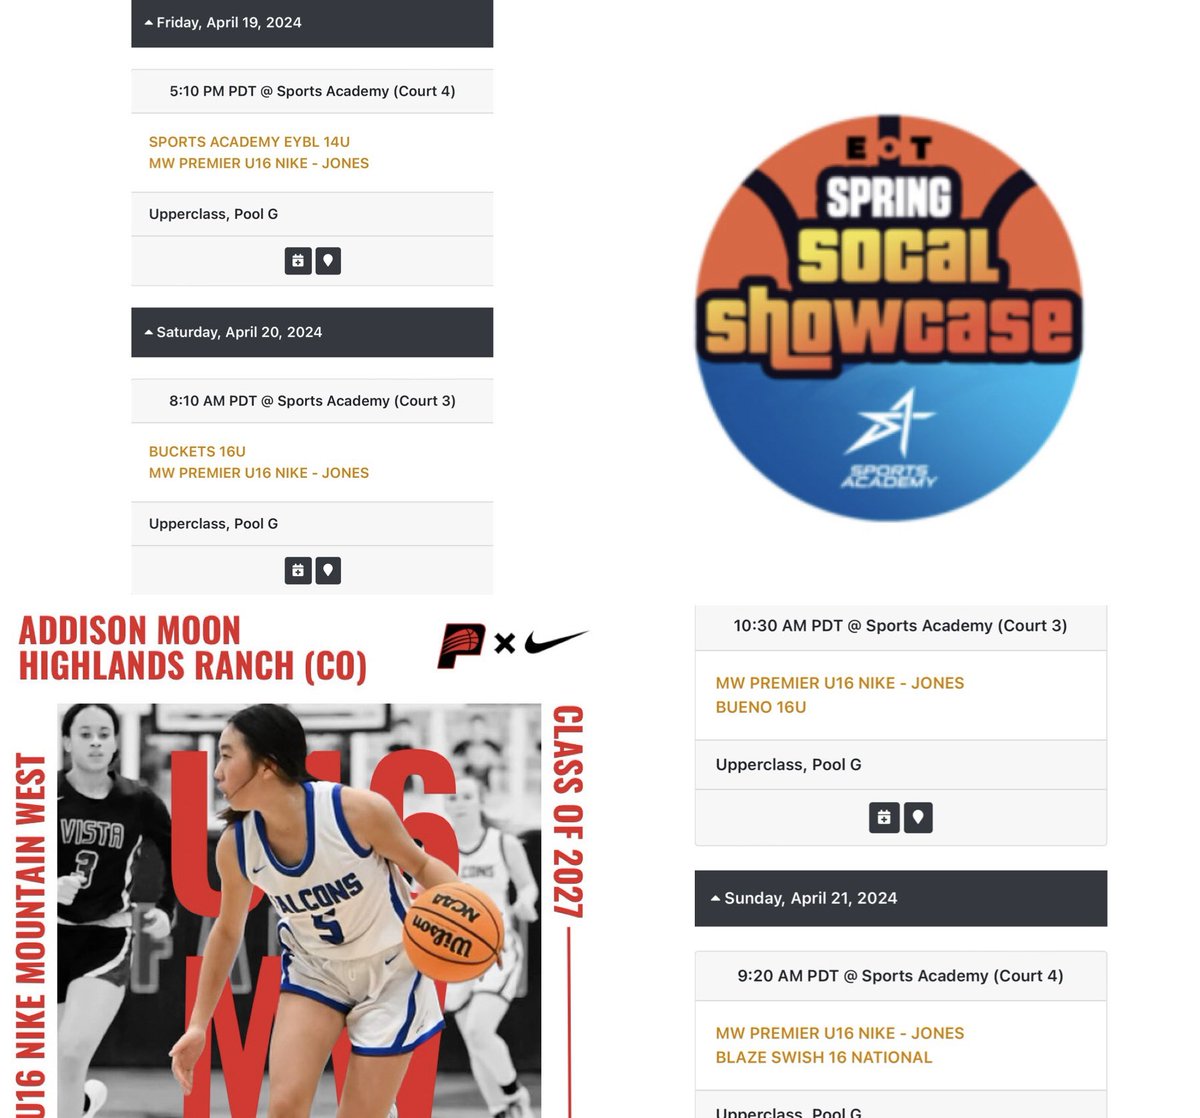 Here is my schedule for this weekend’s EOT Spring SoCal Showcase in Thousand Oaks, CA. Excited to get back on the court with my U16 Mountain West Premier Nike team! @MtnWestPremier @girlsbballco @ColoradoPremier @PGHColorado @jenn_dynis